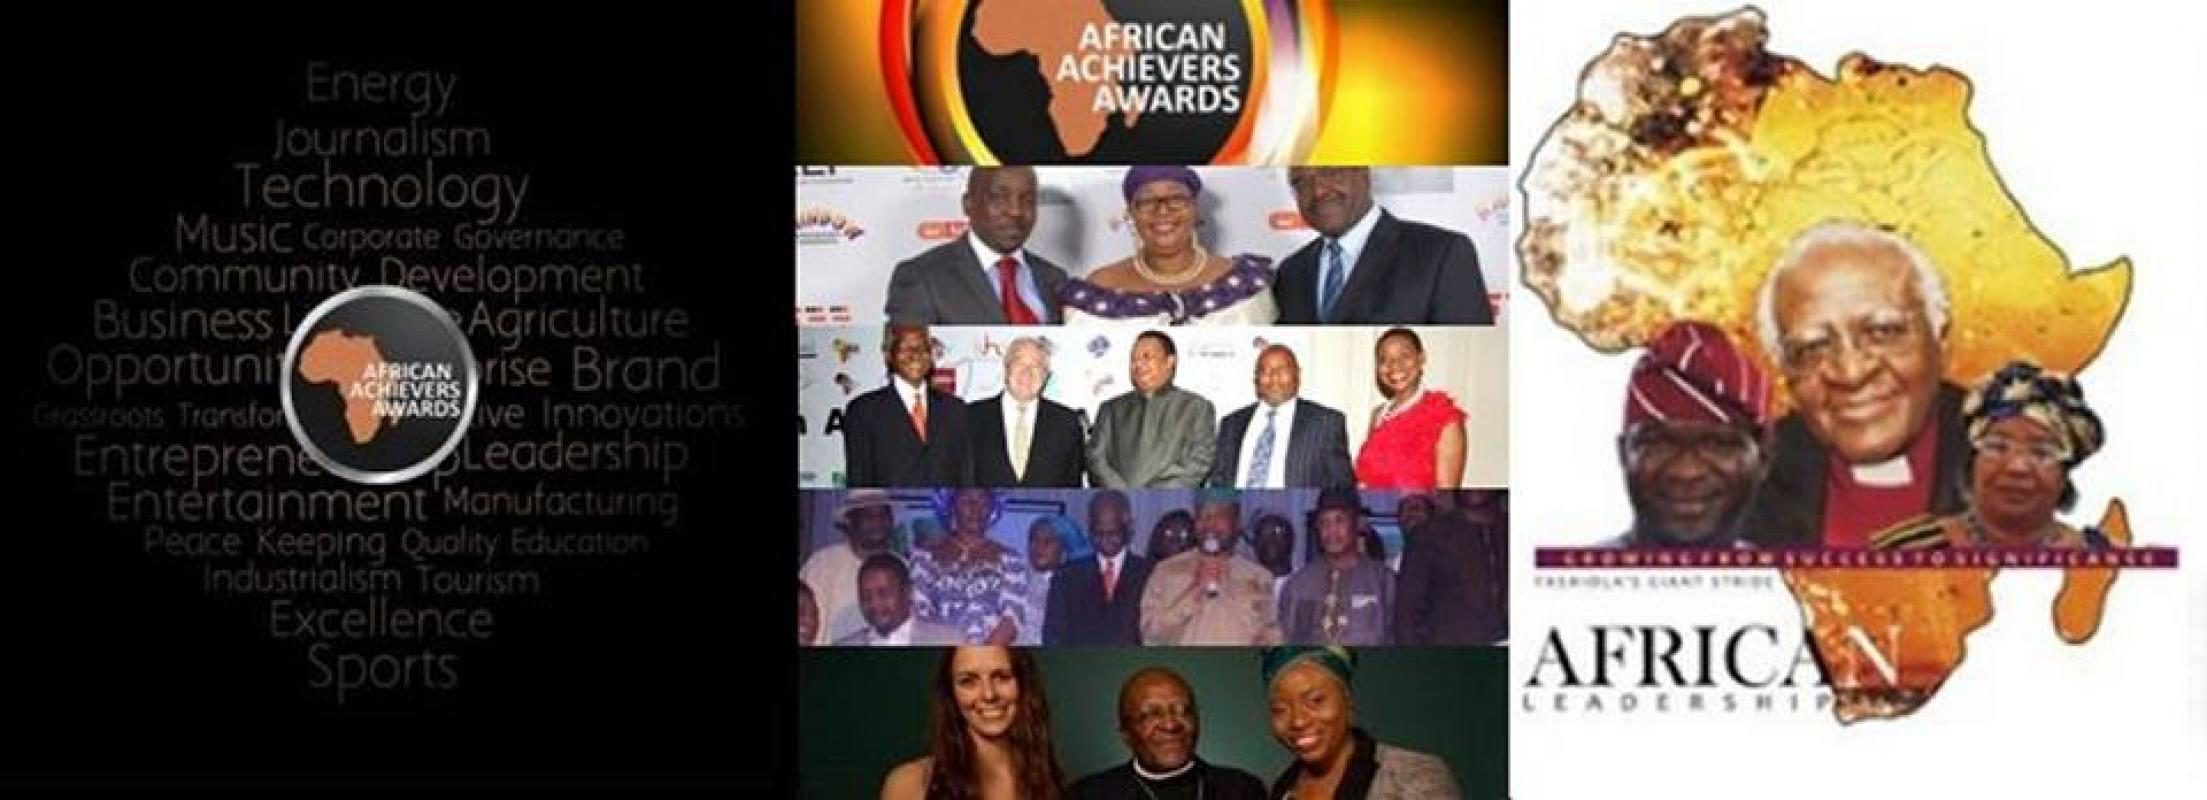 African Achievers Awards 2014 at the Statehouse in Ghana - Botswana Ambassador